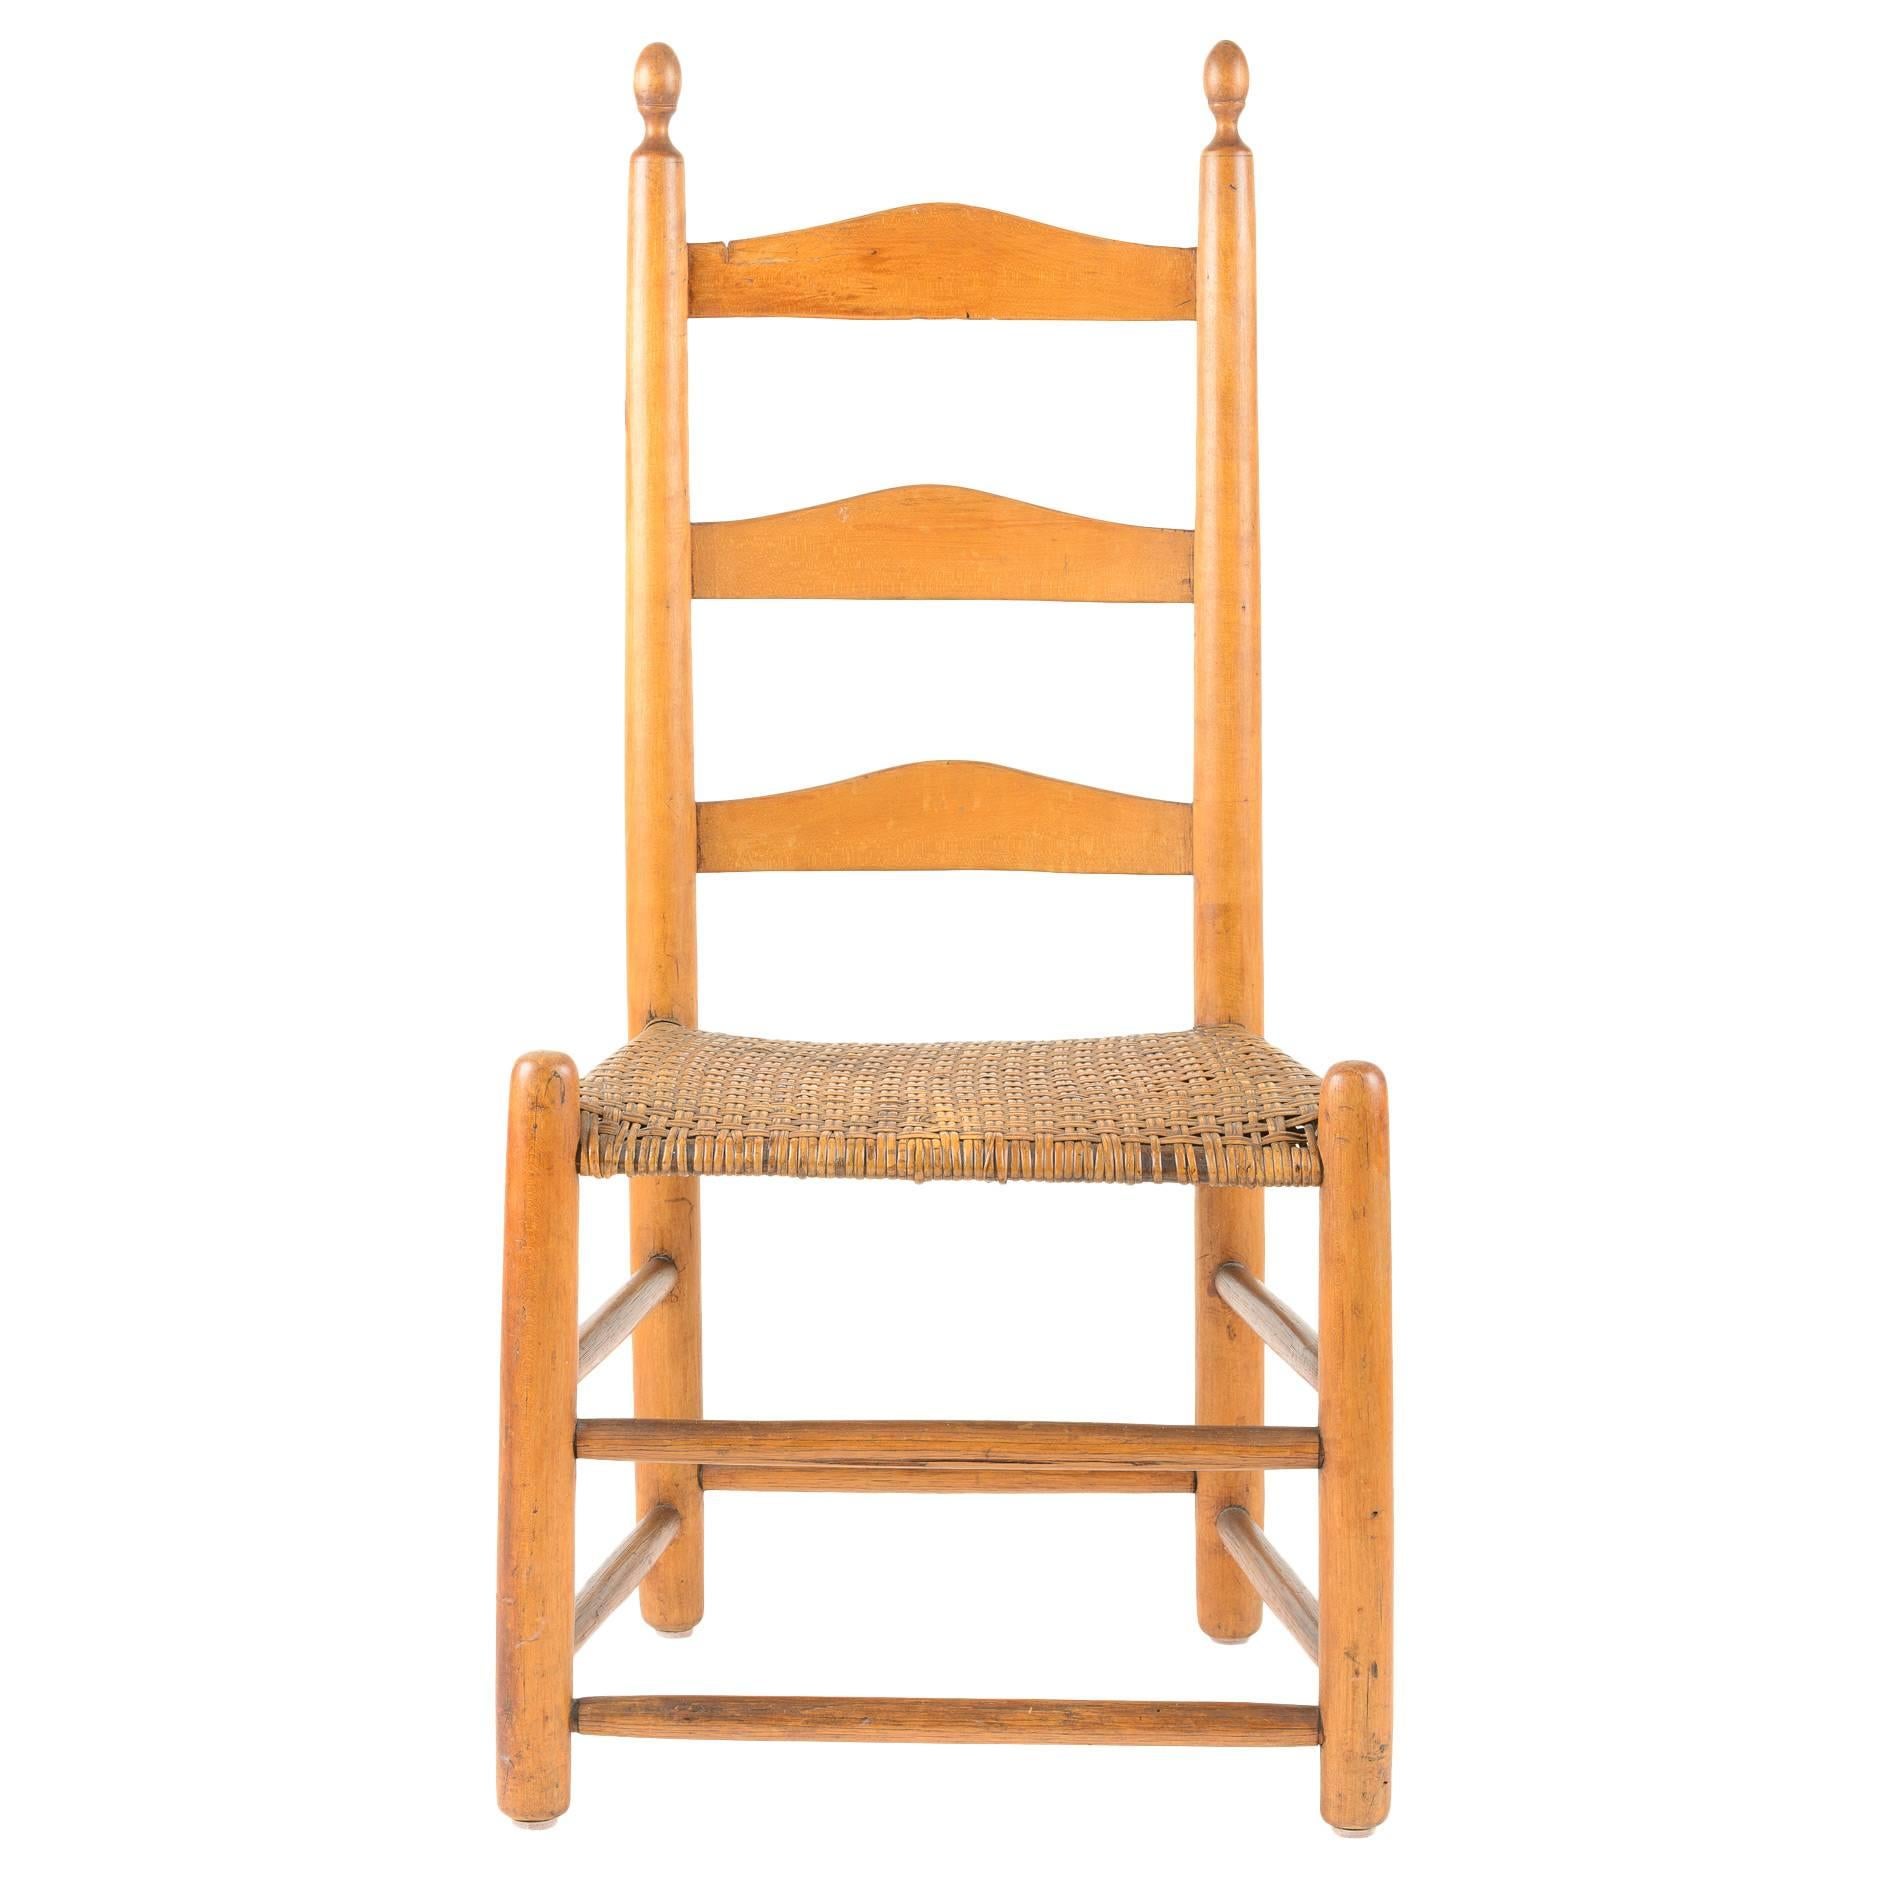 18th Century American Pine Ladder Back Chair with Original Woven Seat